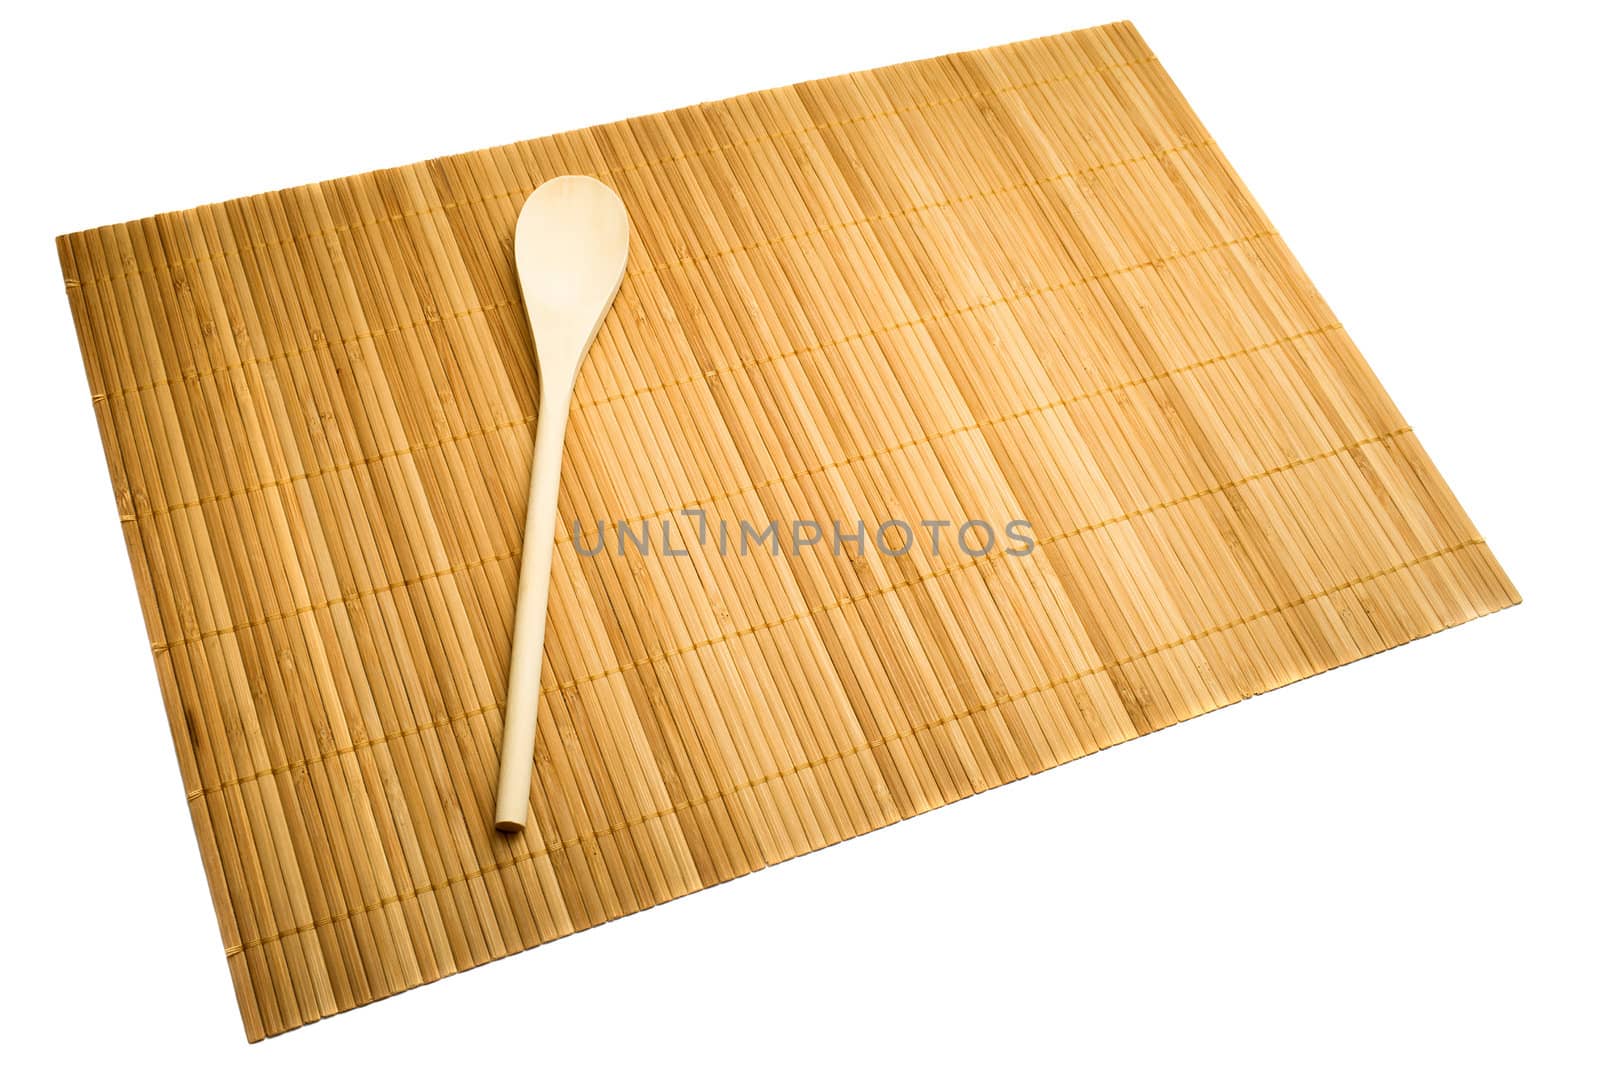 Wooden spoon on mat of bamboo, isolated on white.